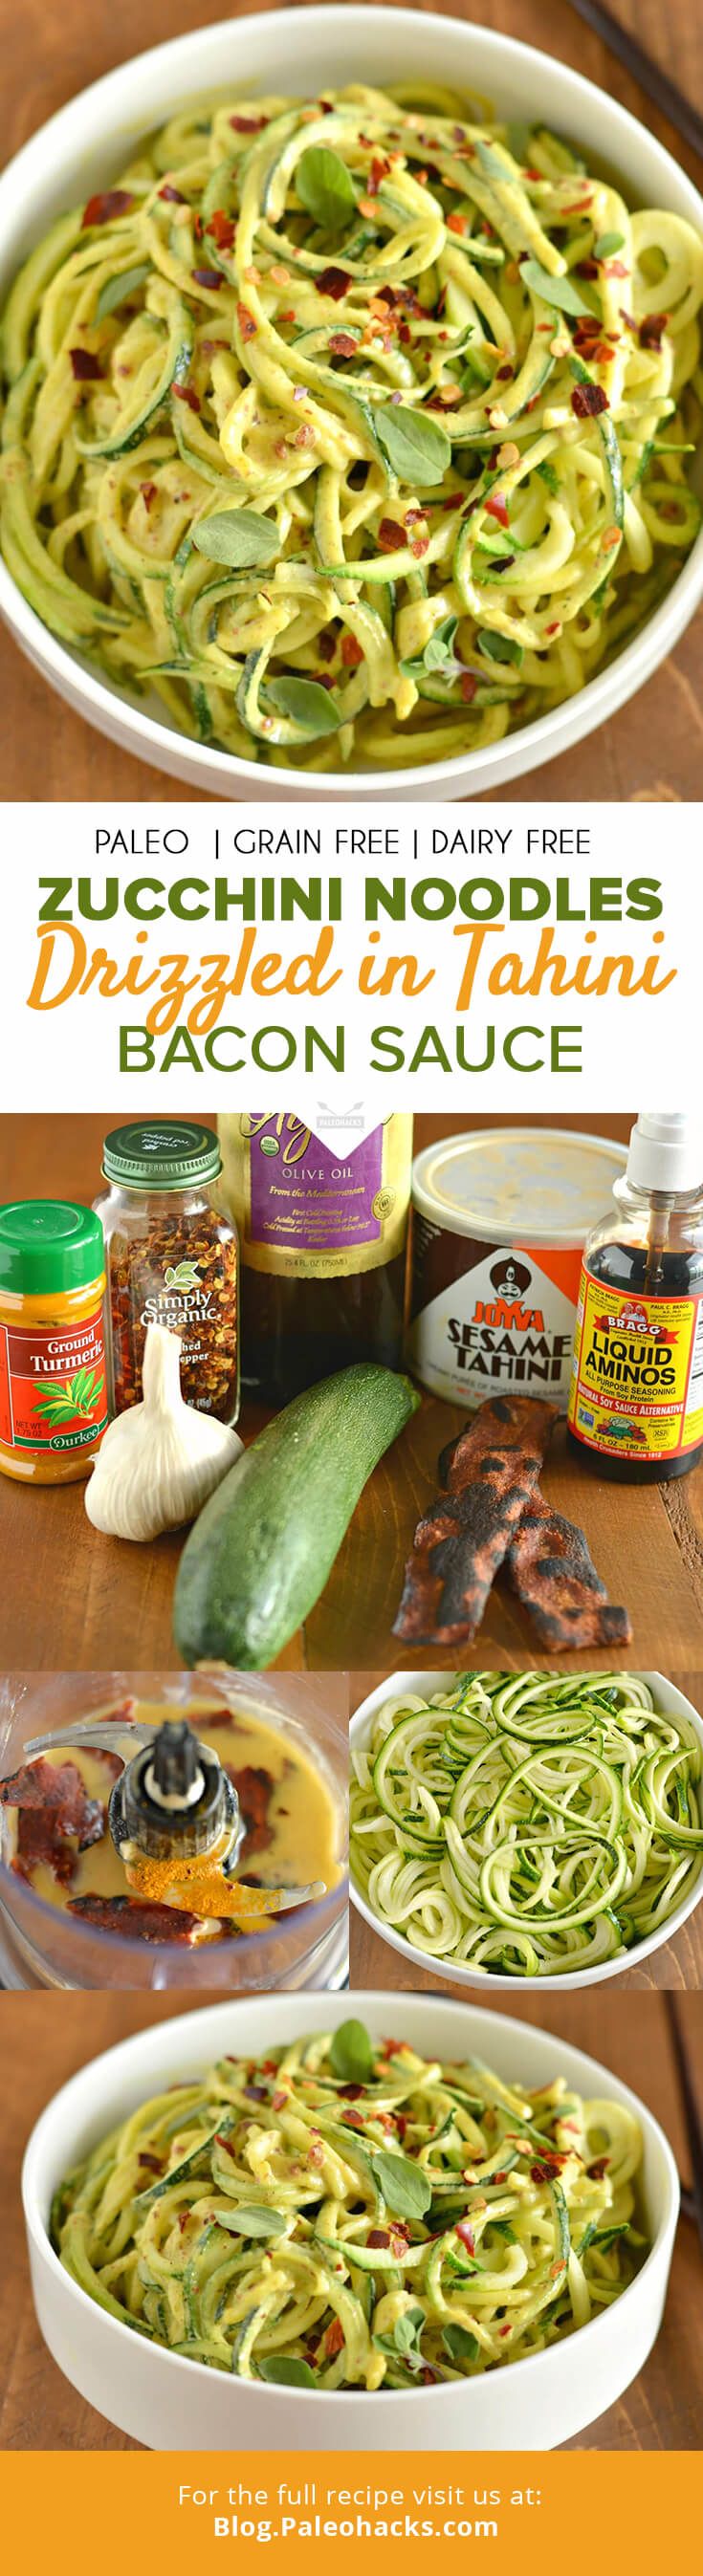 pin-zUcchini-noodles-drizzled-in-tahini-bacon-sauce-2